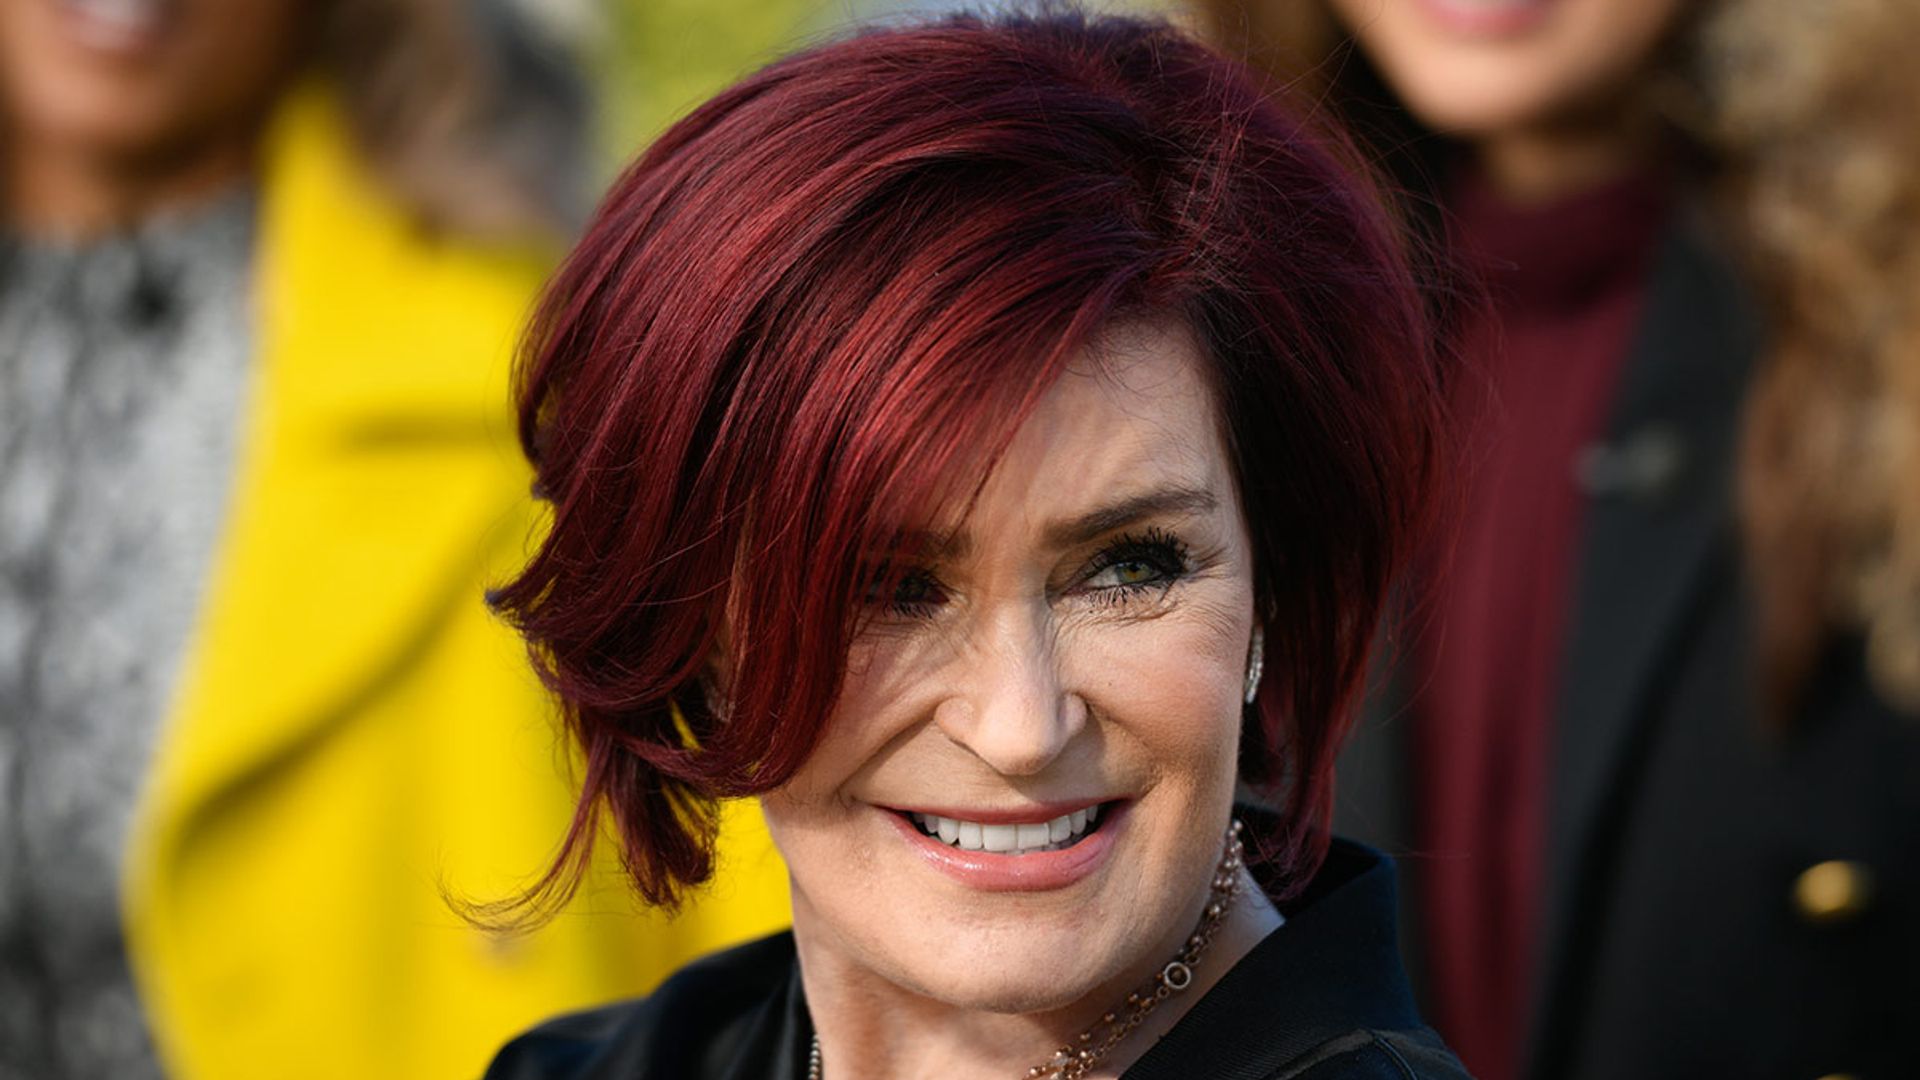 Sharon osbourne with her daughter kelly osbourne at the red carpet of the 3...